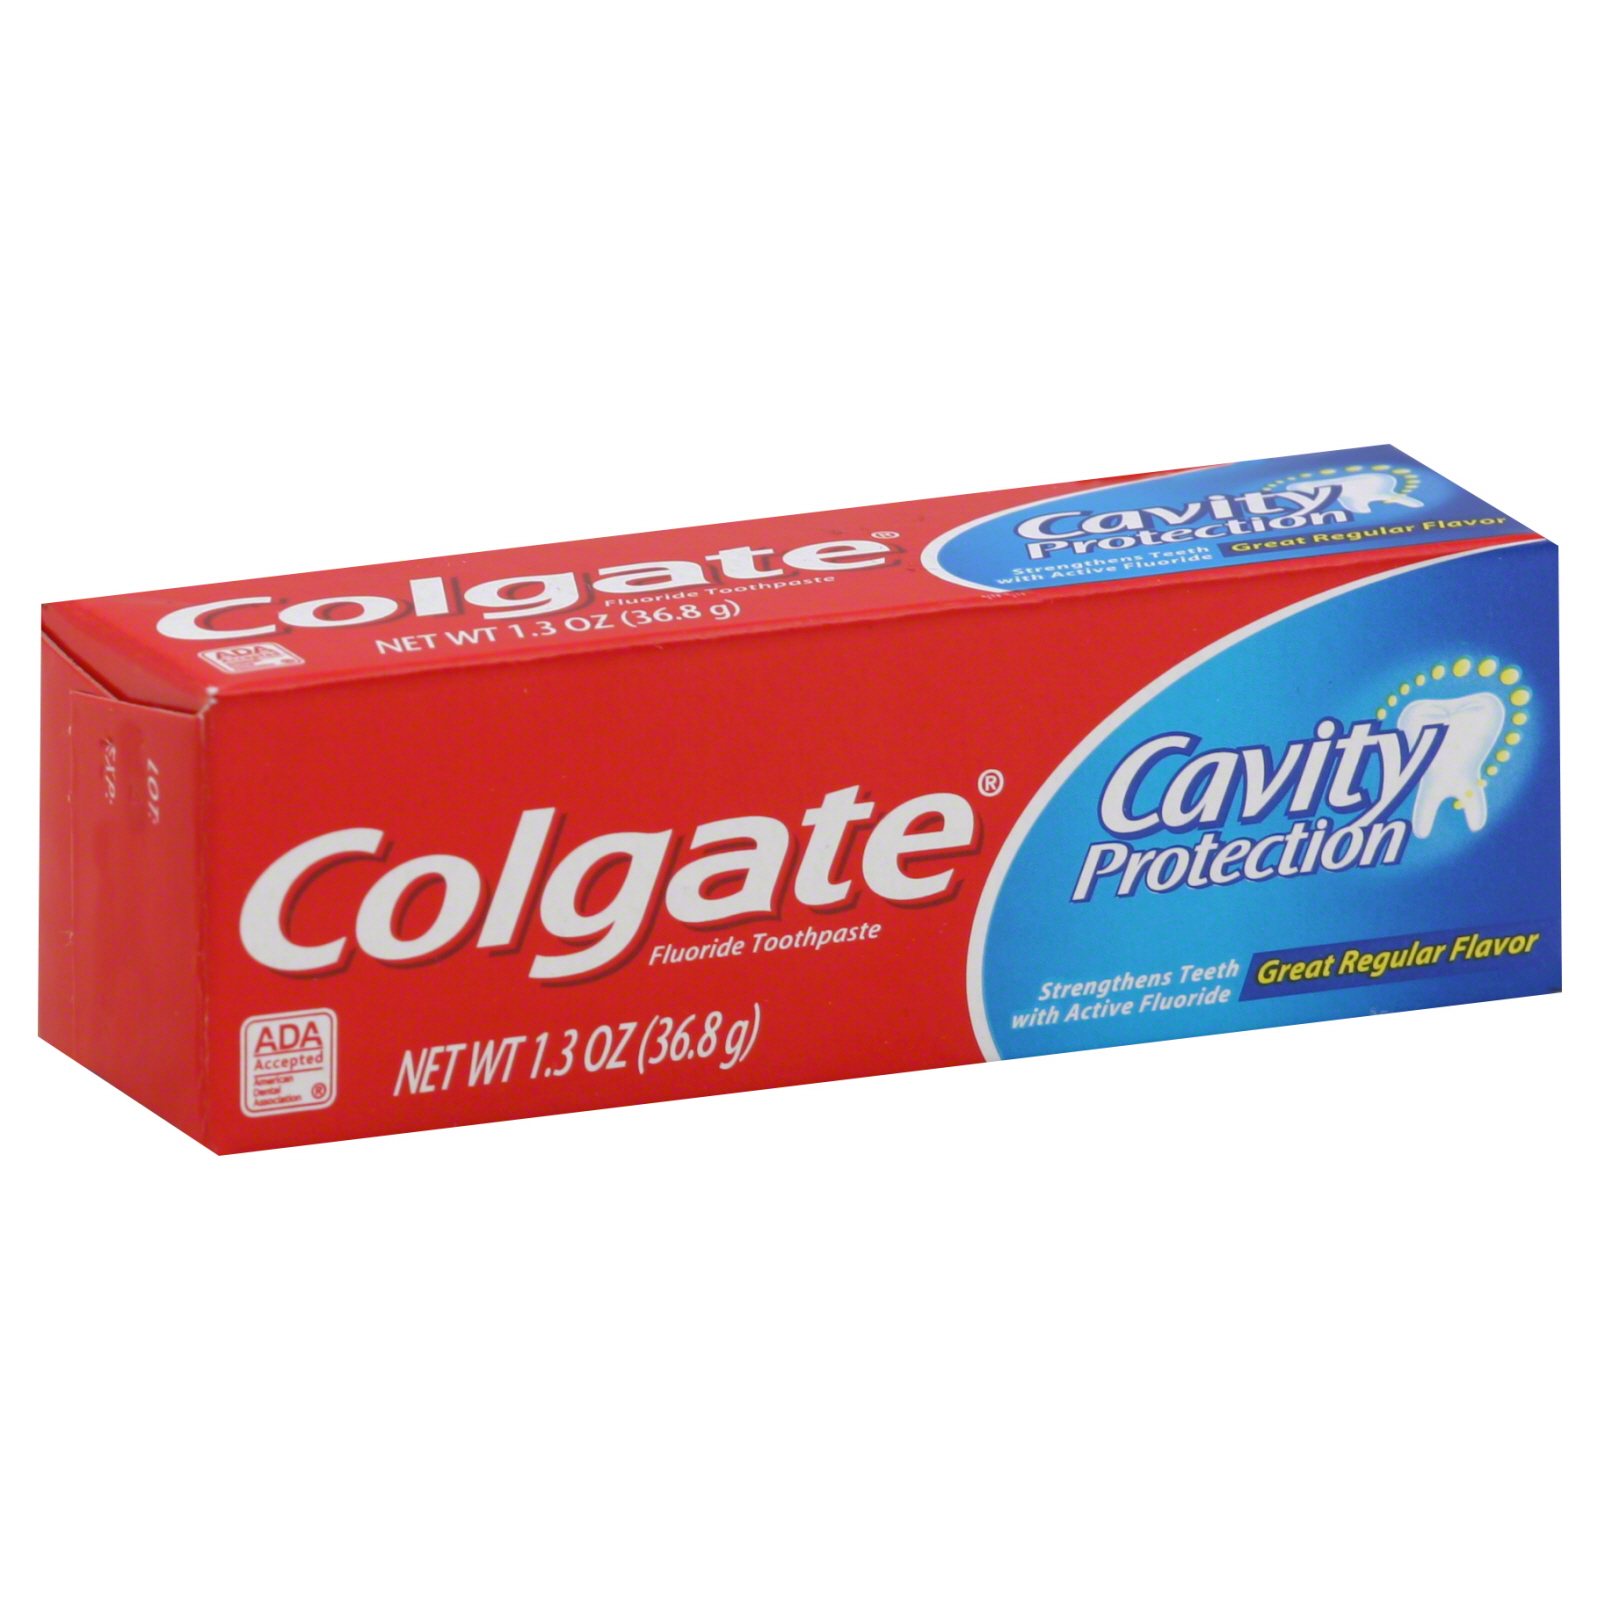 Colgate-Palmolive Cavity Protection Toothpaste, Fluoride, Great Regular Flavor, 1.3 oz (36.8 g)